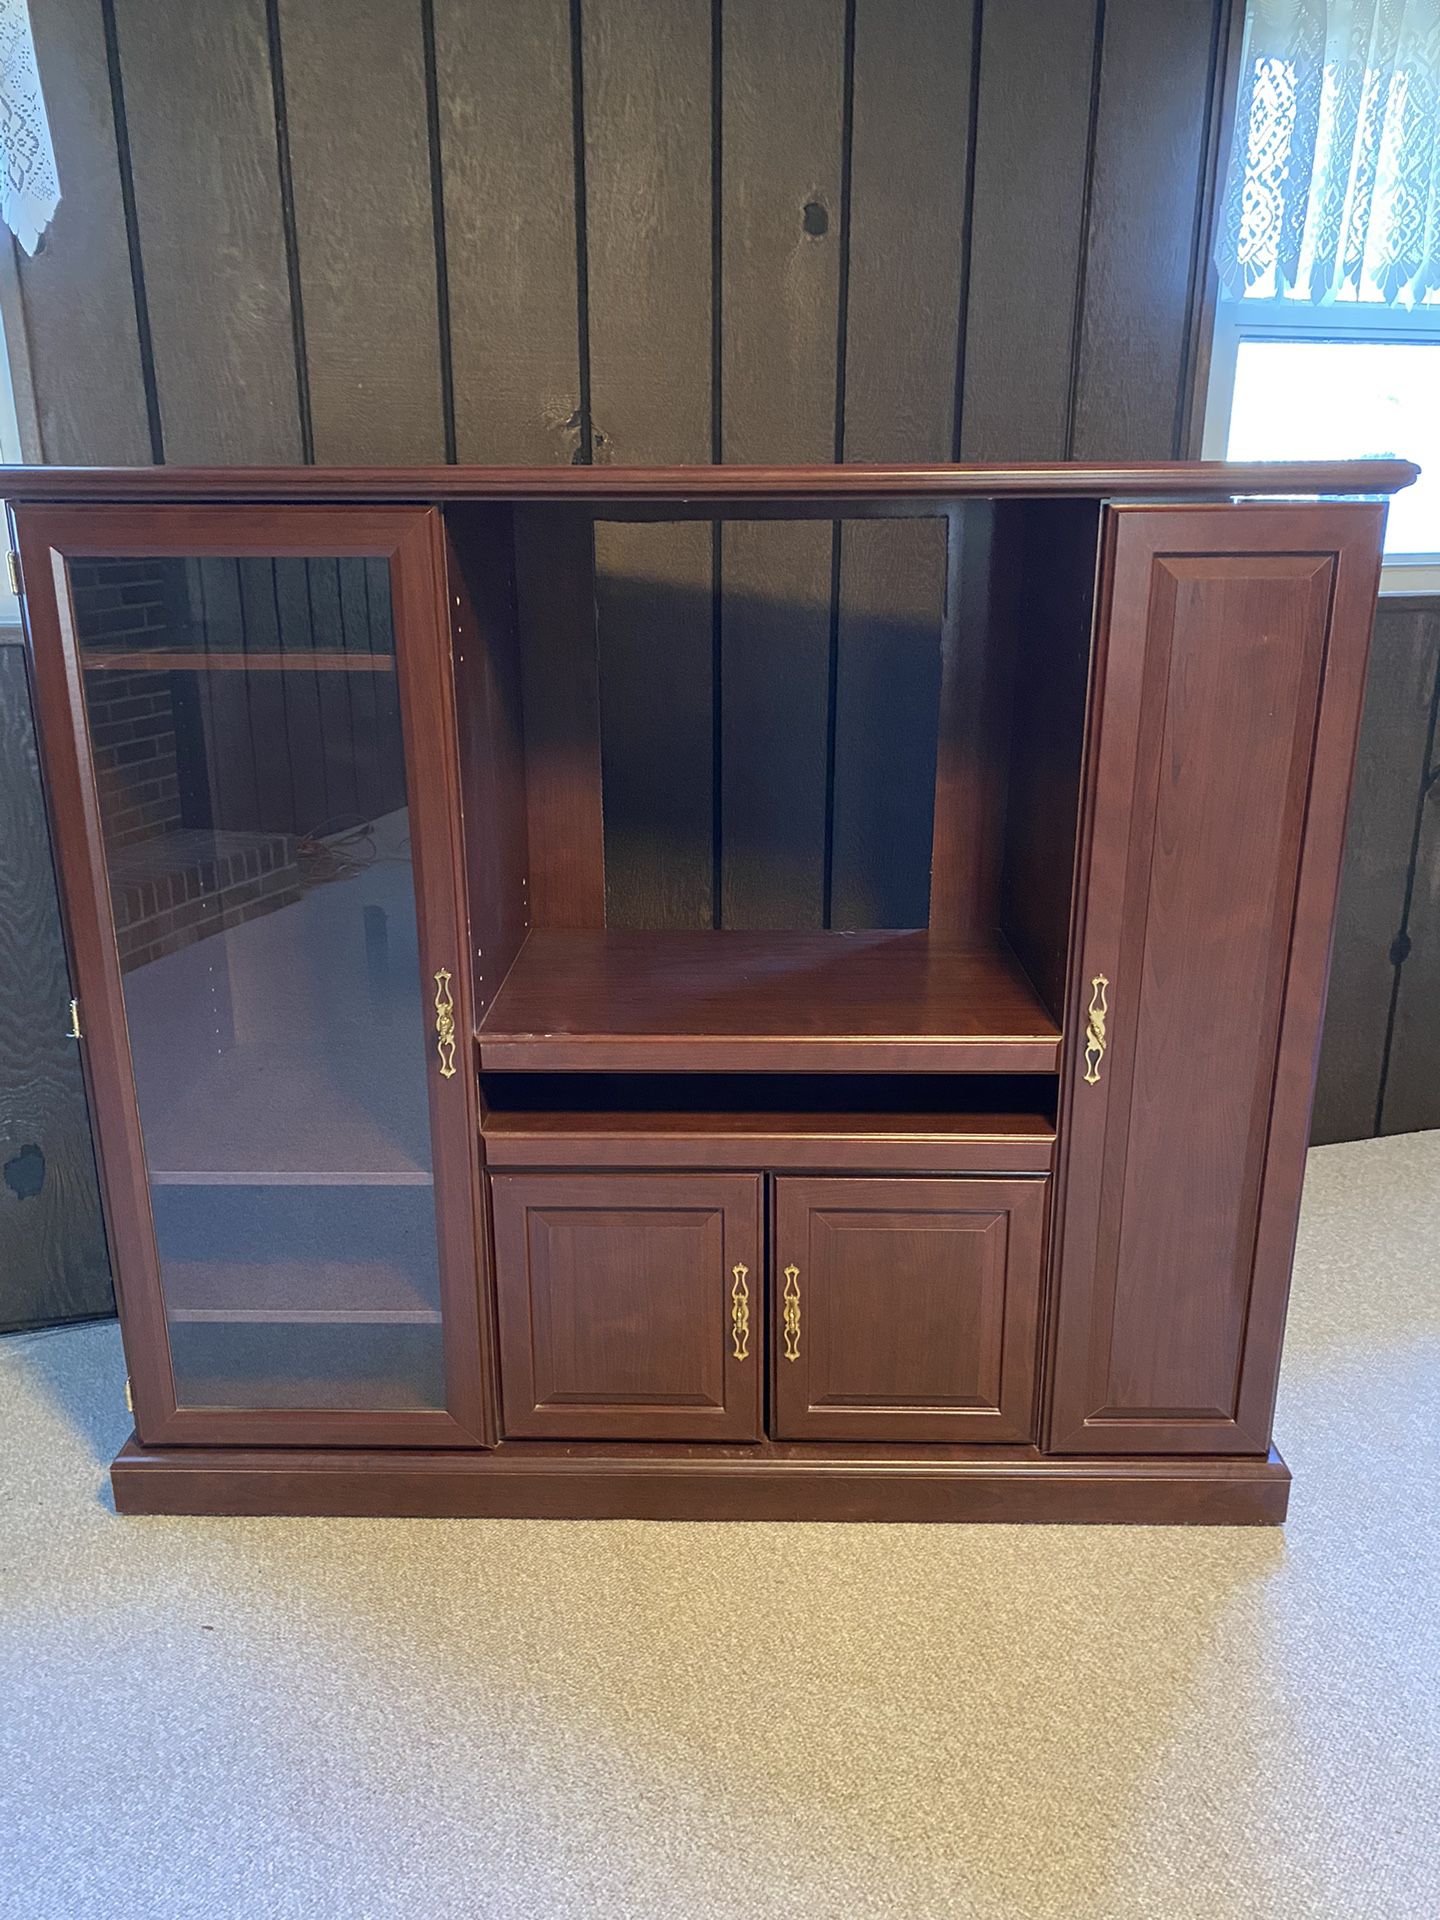 TV/Component Cabinet 